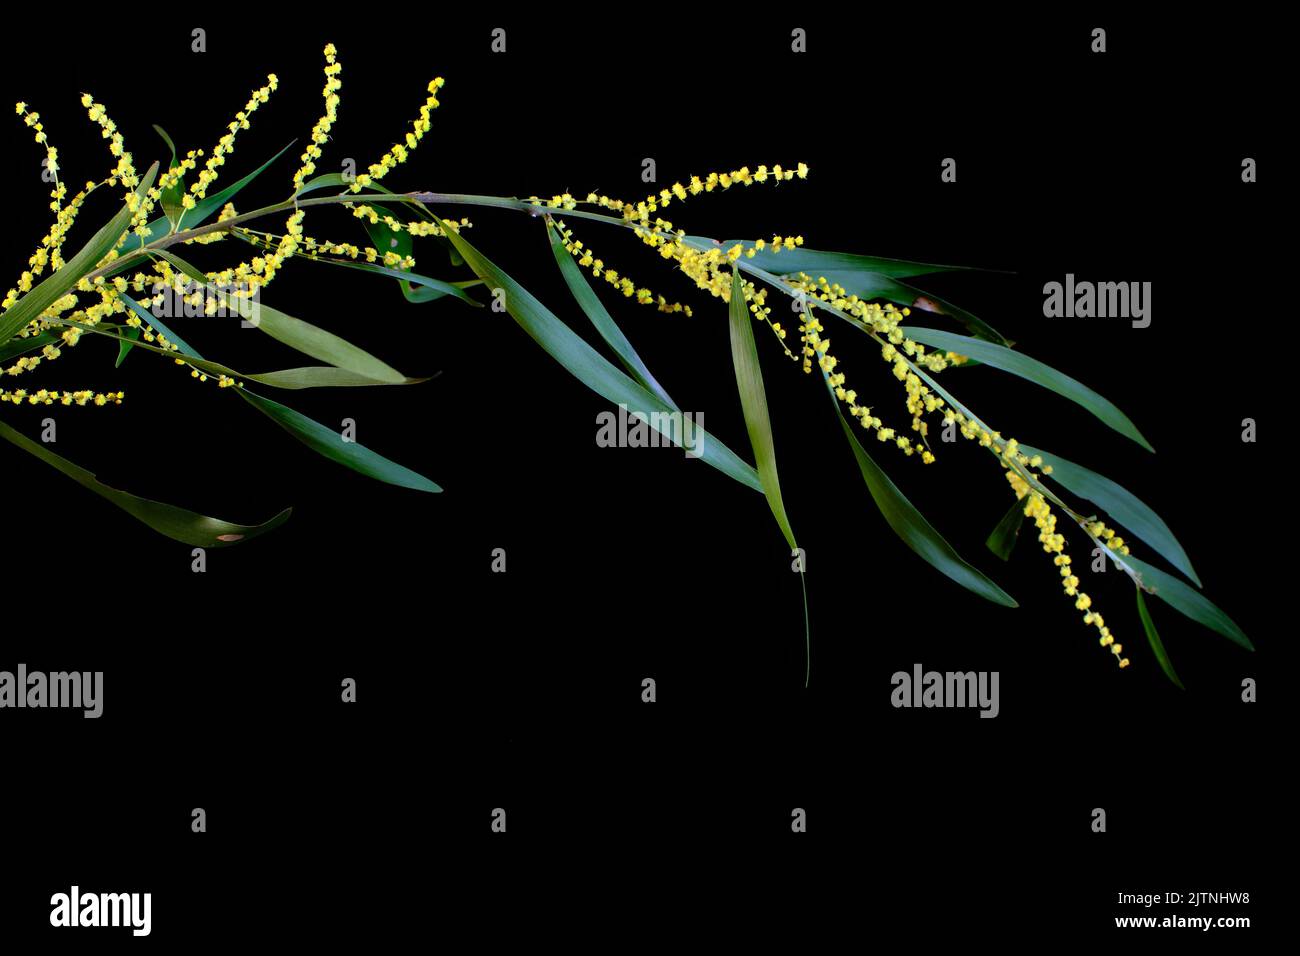 A wattle branch full of flowers, photographed against a dark background Stock Photo